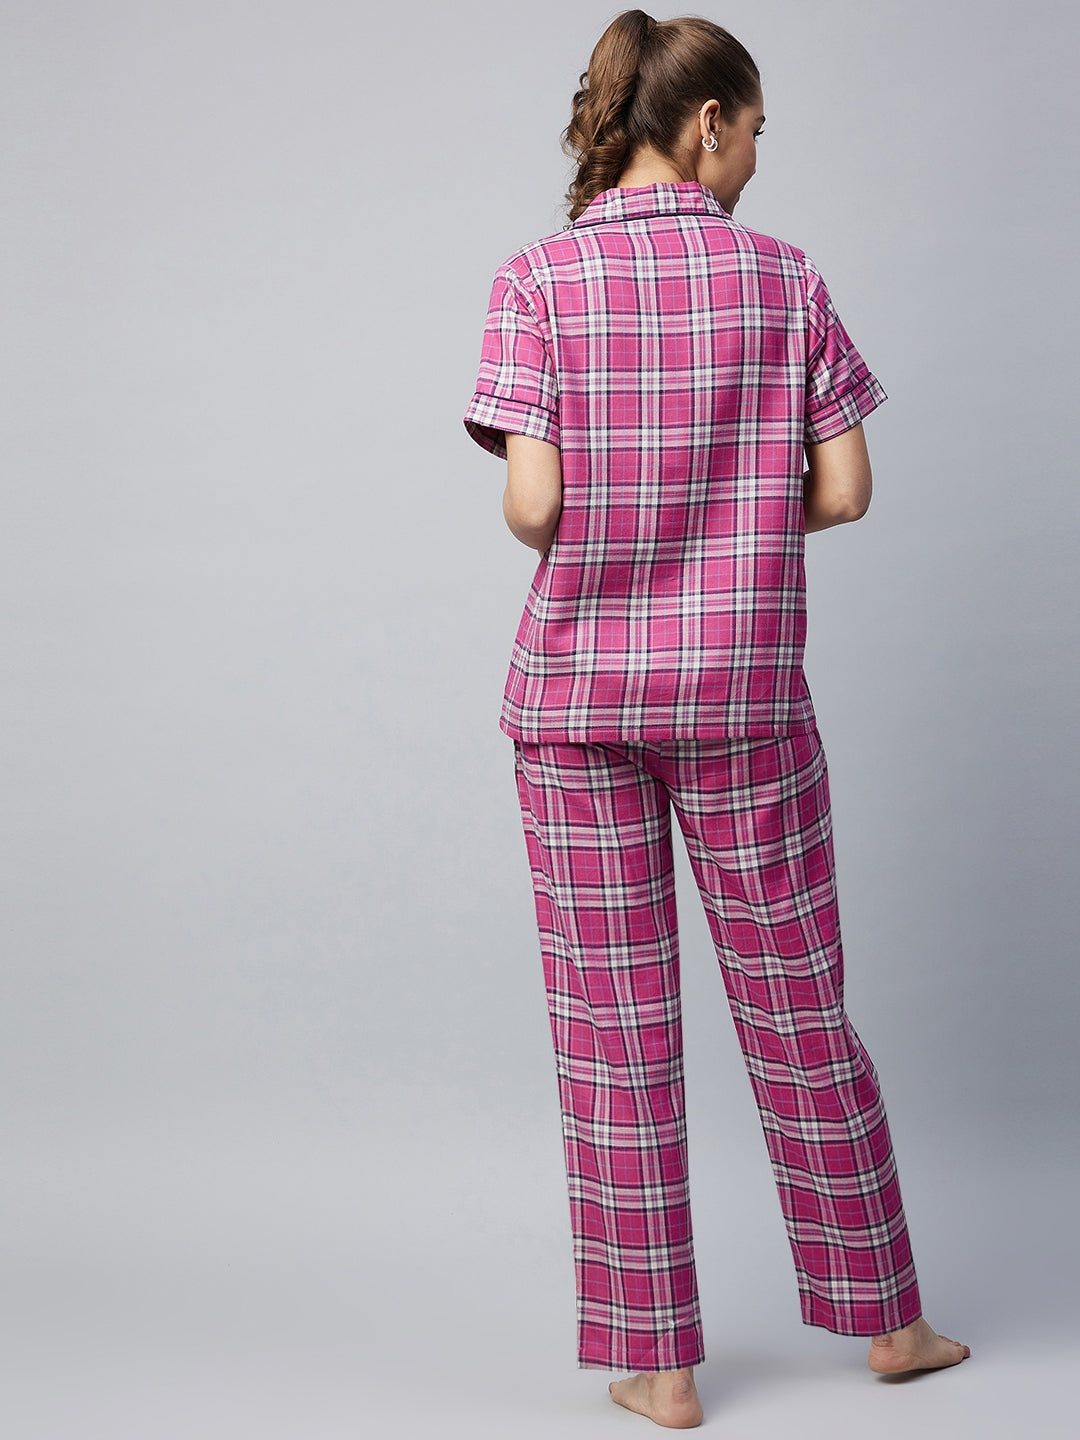 Women's Cotton Pink Checkered Night Suit